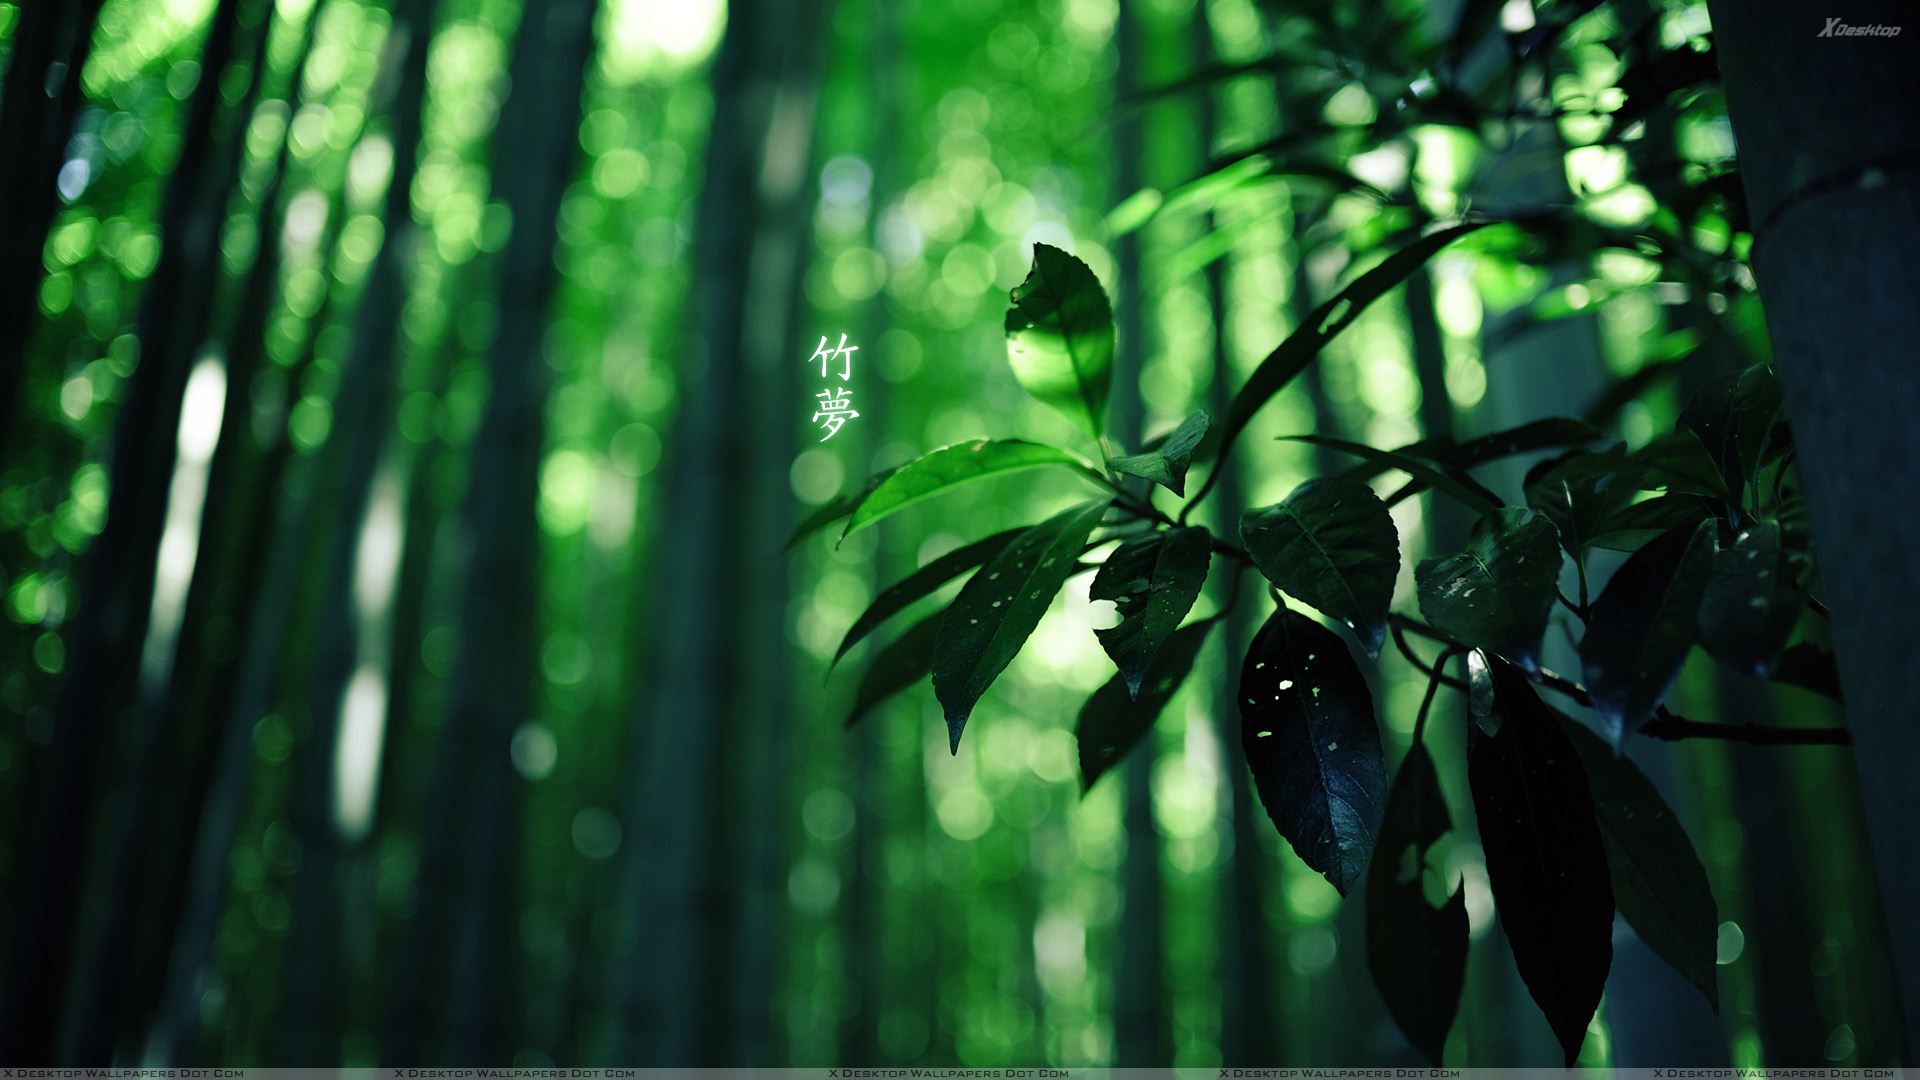 Green Leaves Photo In Forest Wallpaper